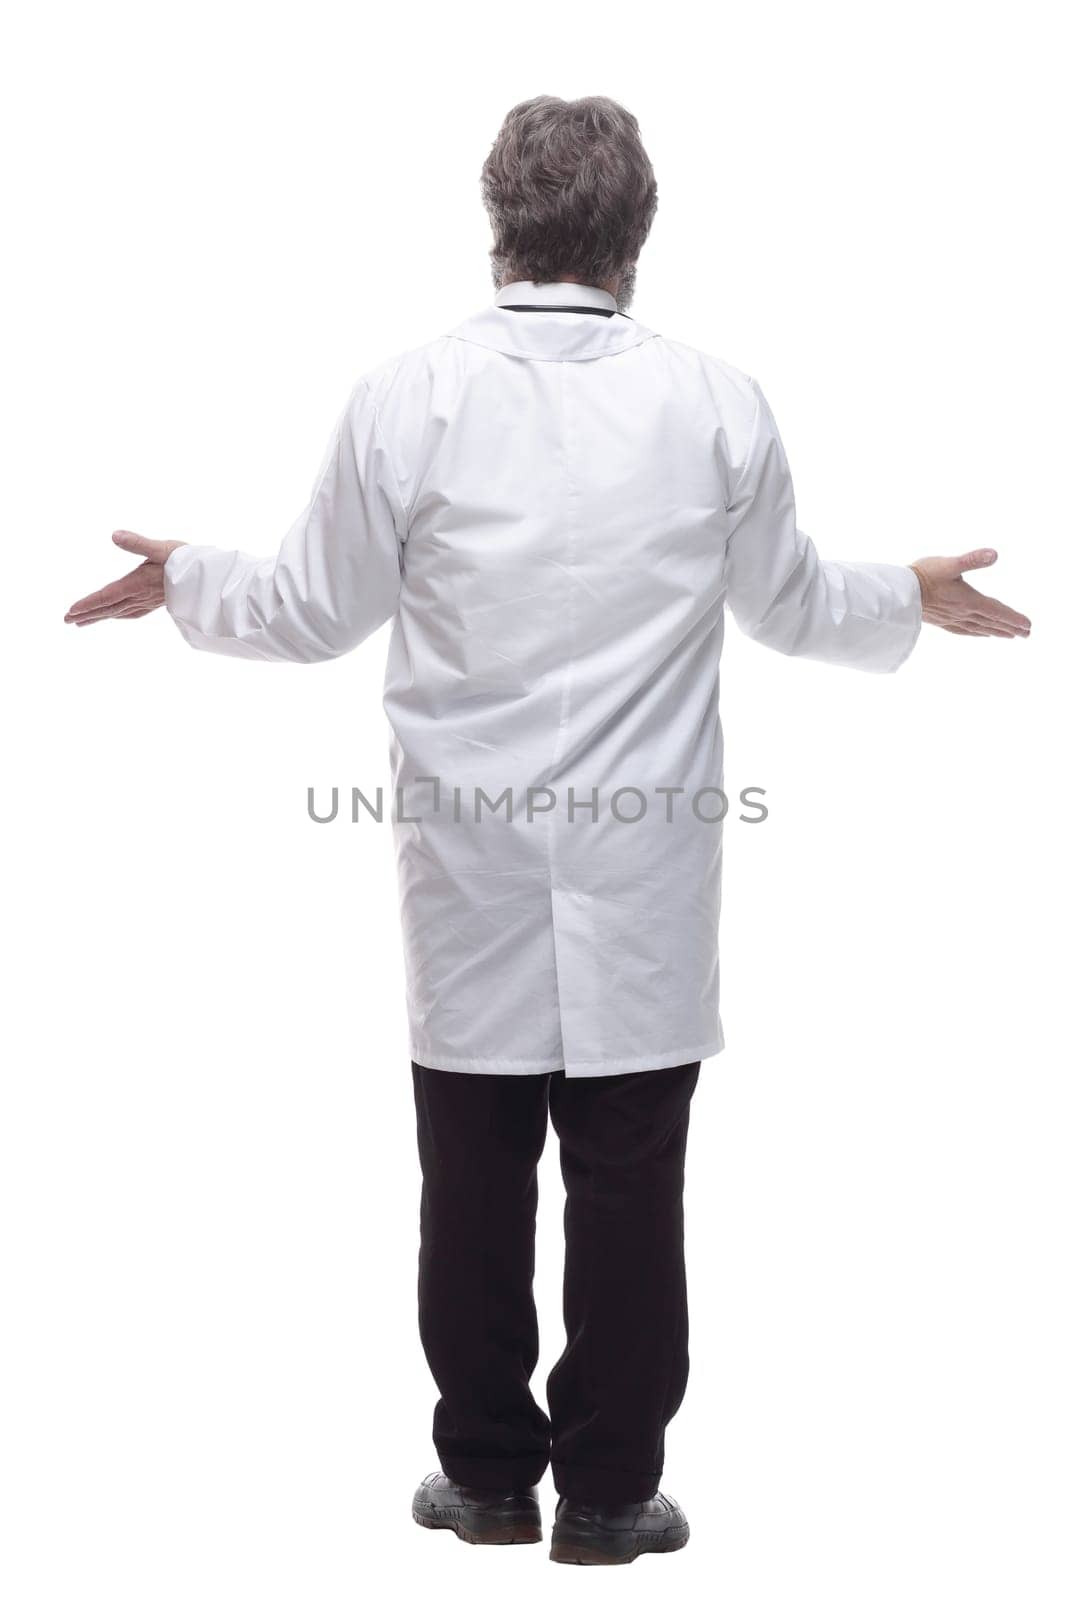 senior doctor reading an ad on a large white screen. by asdf